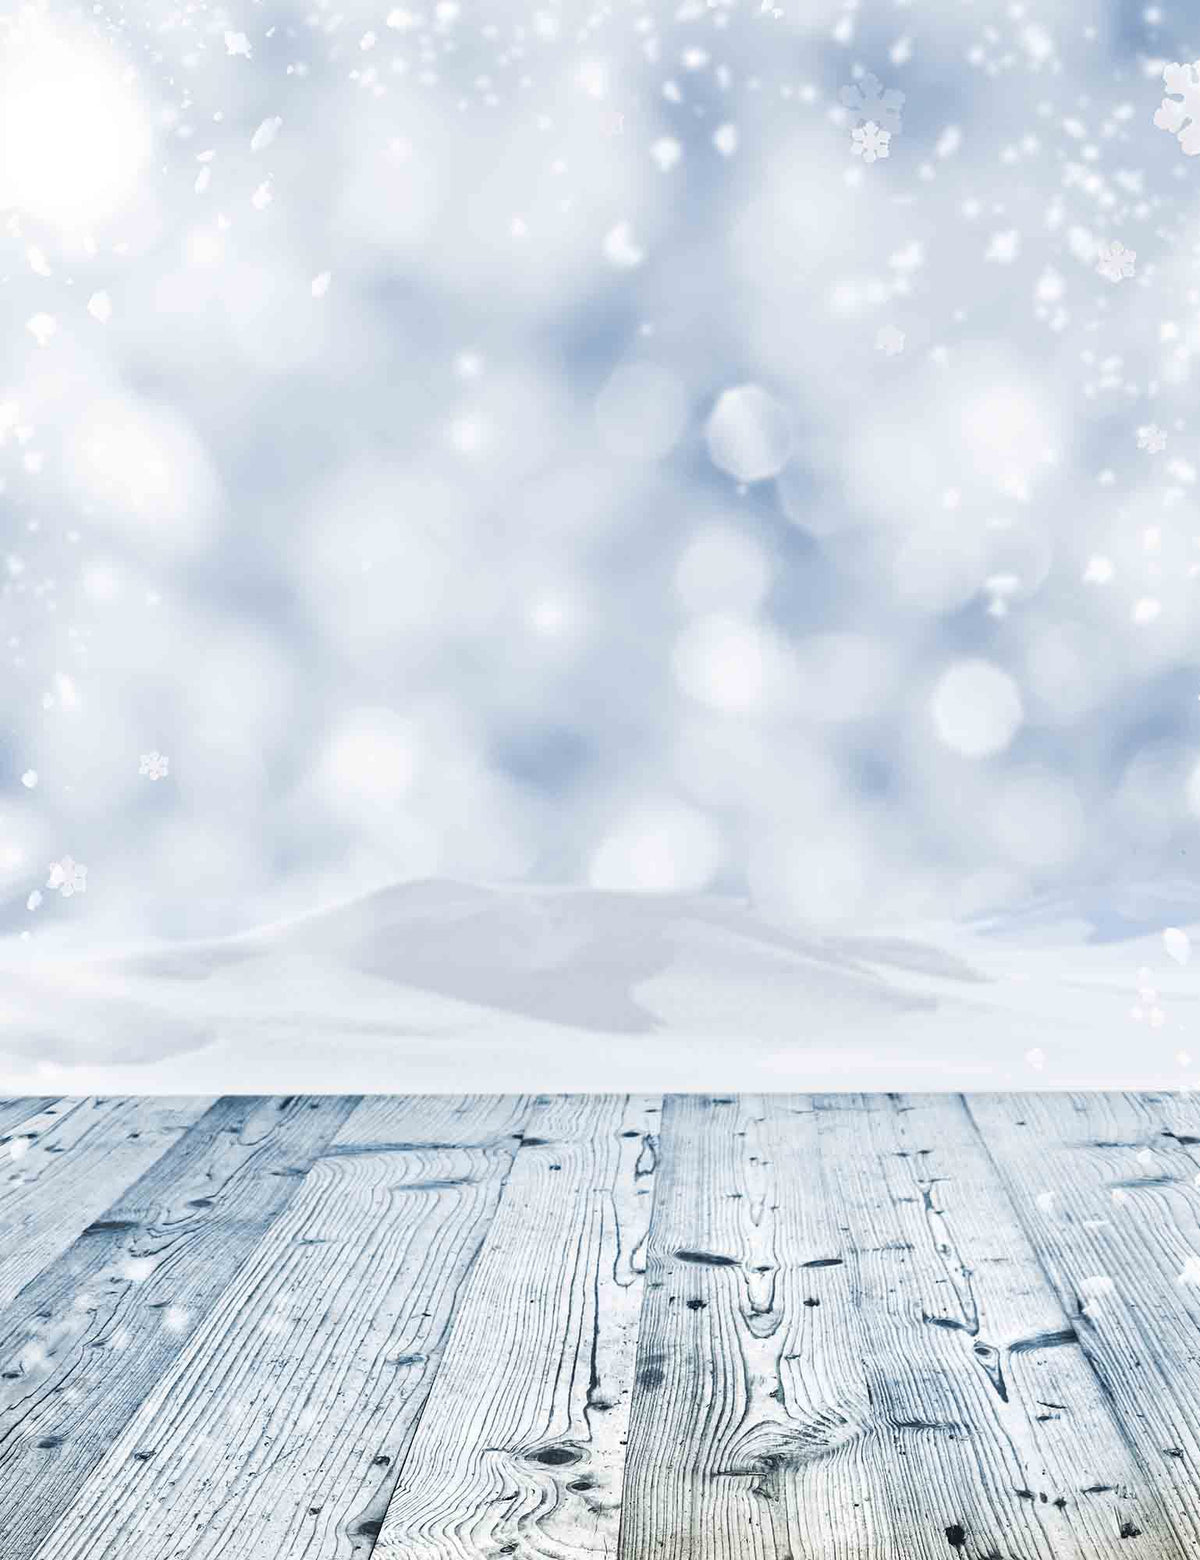 Bokeh Snow White Background With Wood Floor For Holiday Backdrop Shopbackdrop